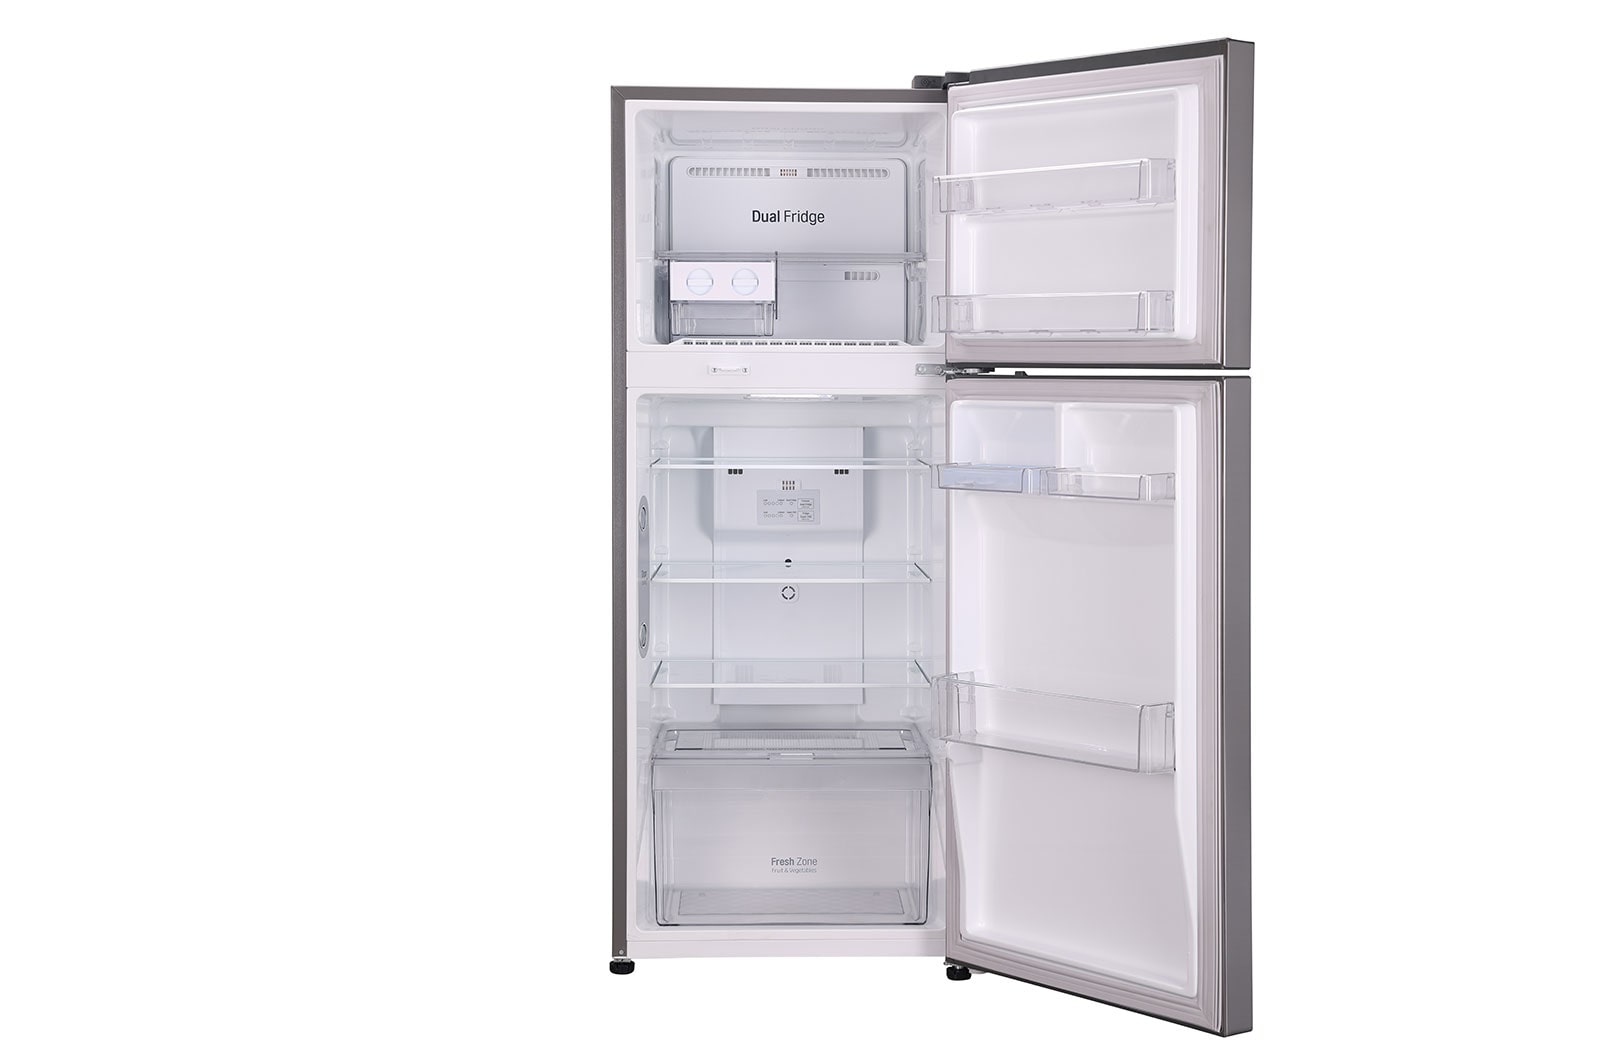 LG 260 L Frost Free Double Door Refrigerator in Shiney Steel Color GL-T292RPZY